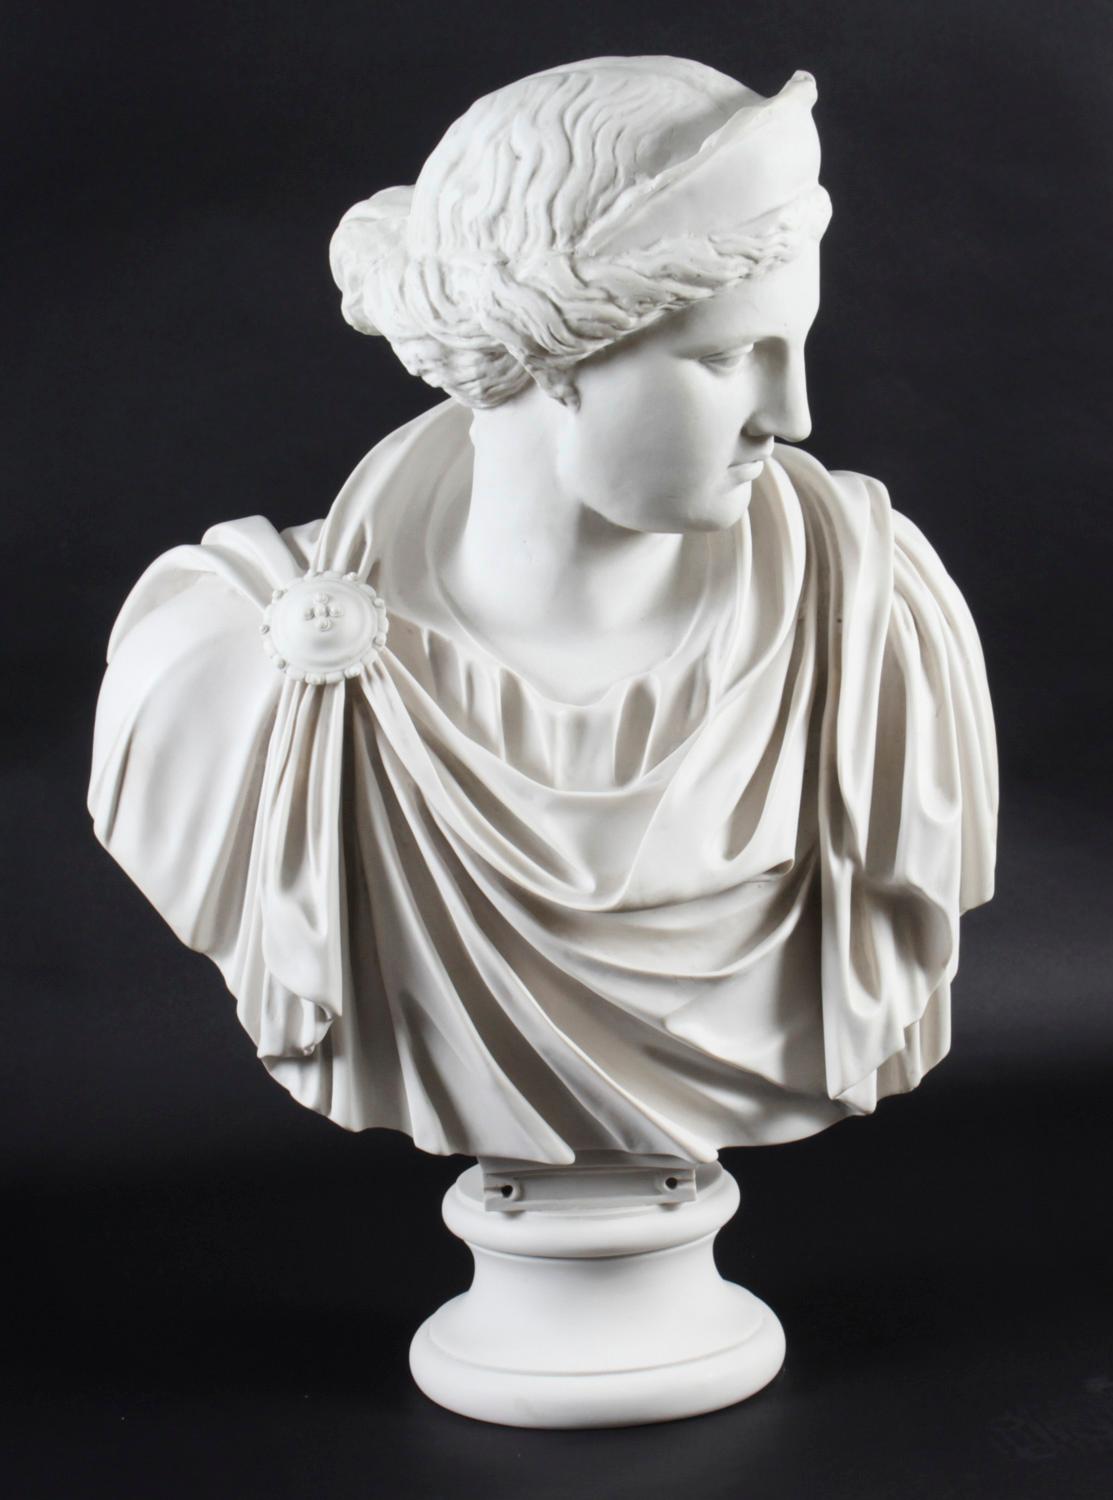 A beautifully sculpted marble bust of a Roman Goddess in a toga.

After the full size Roman marble copy which was after the ancient Greek statue depicting Diana the Huntress by Leochares.

The attention to detail throughout the piece is second